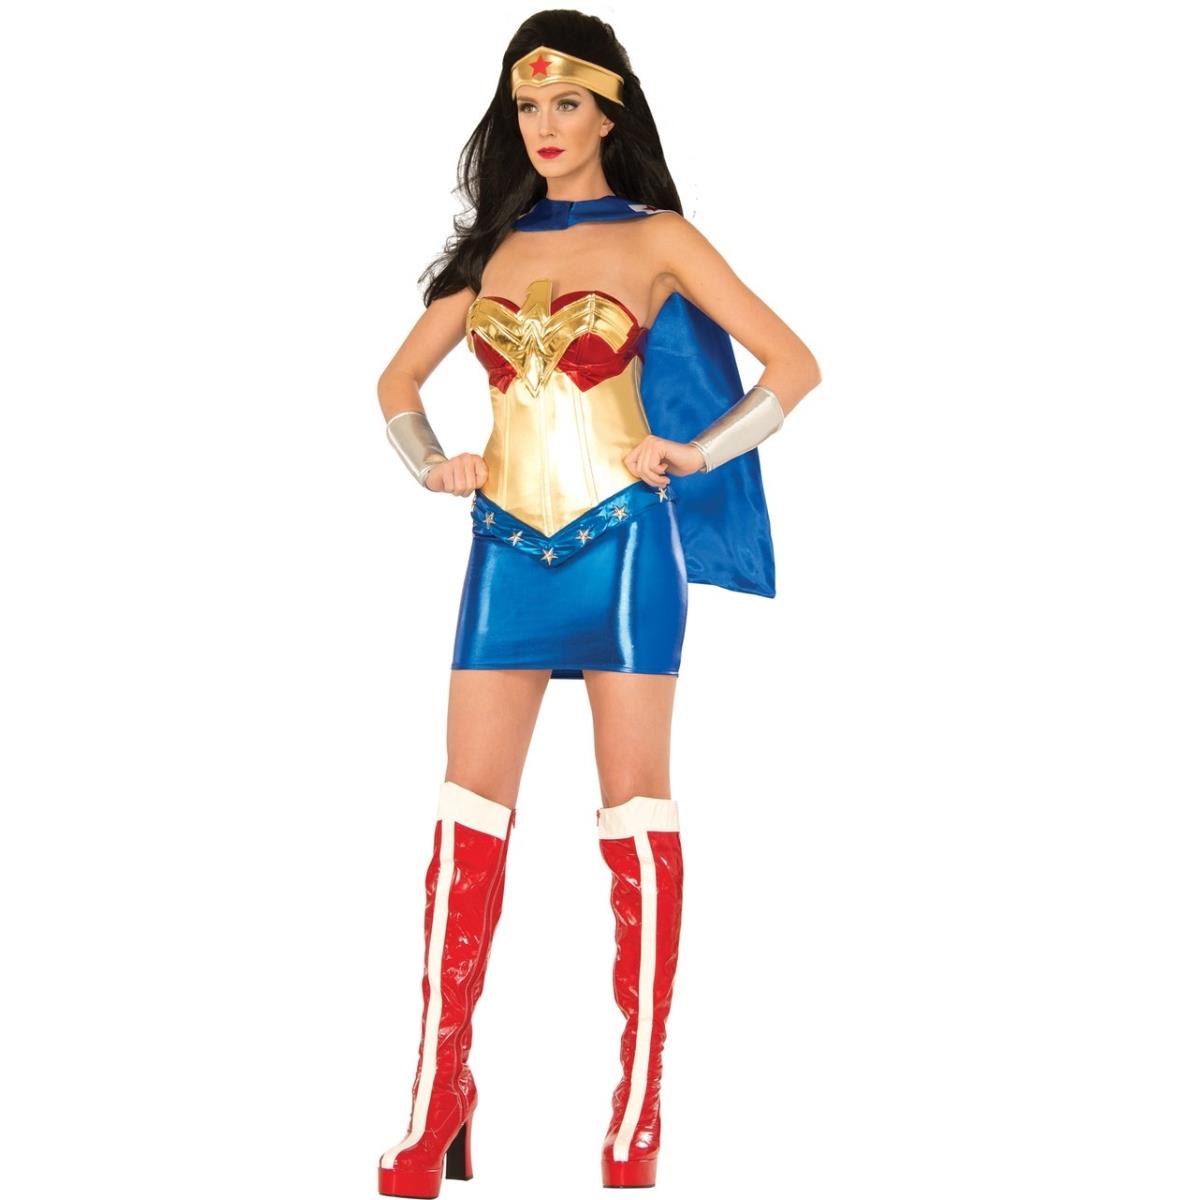 244864 Wonder Woman Supreme Costume For Adults - Blue & Gold, Small